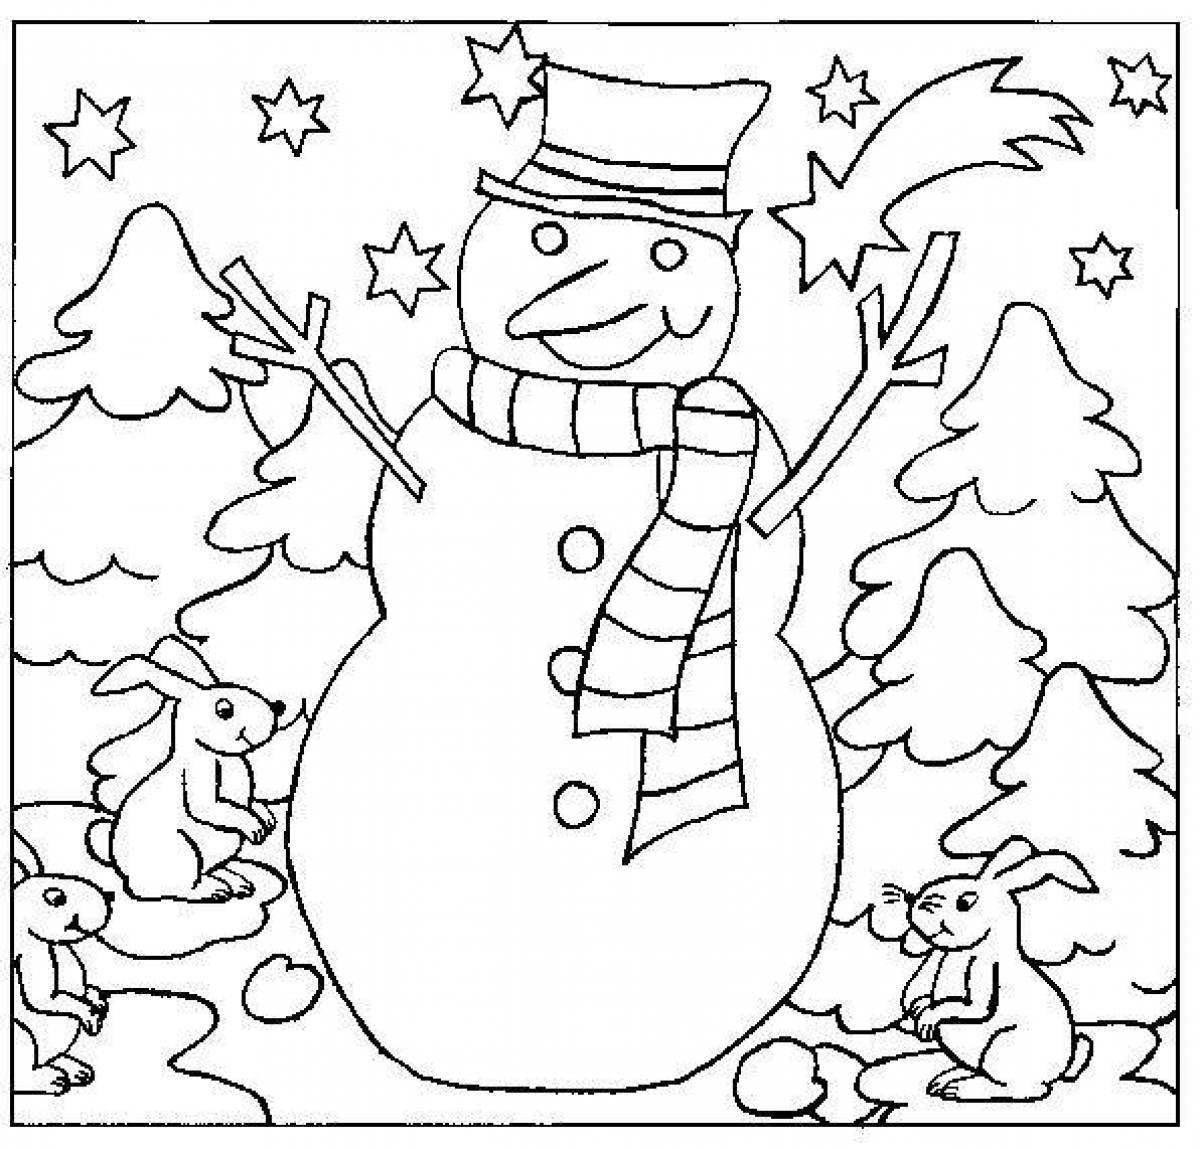 Coloring book magical tree and snowman